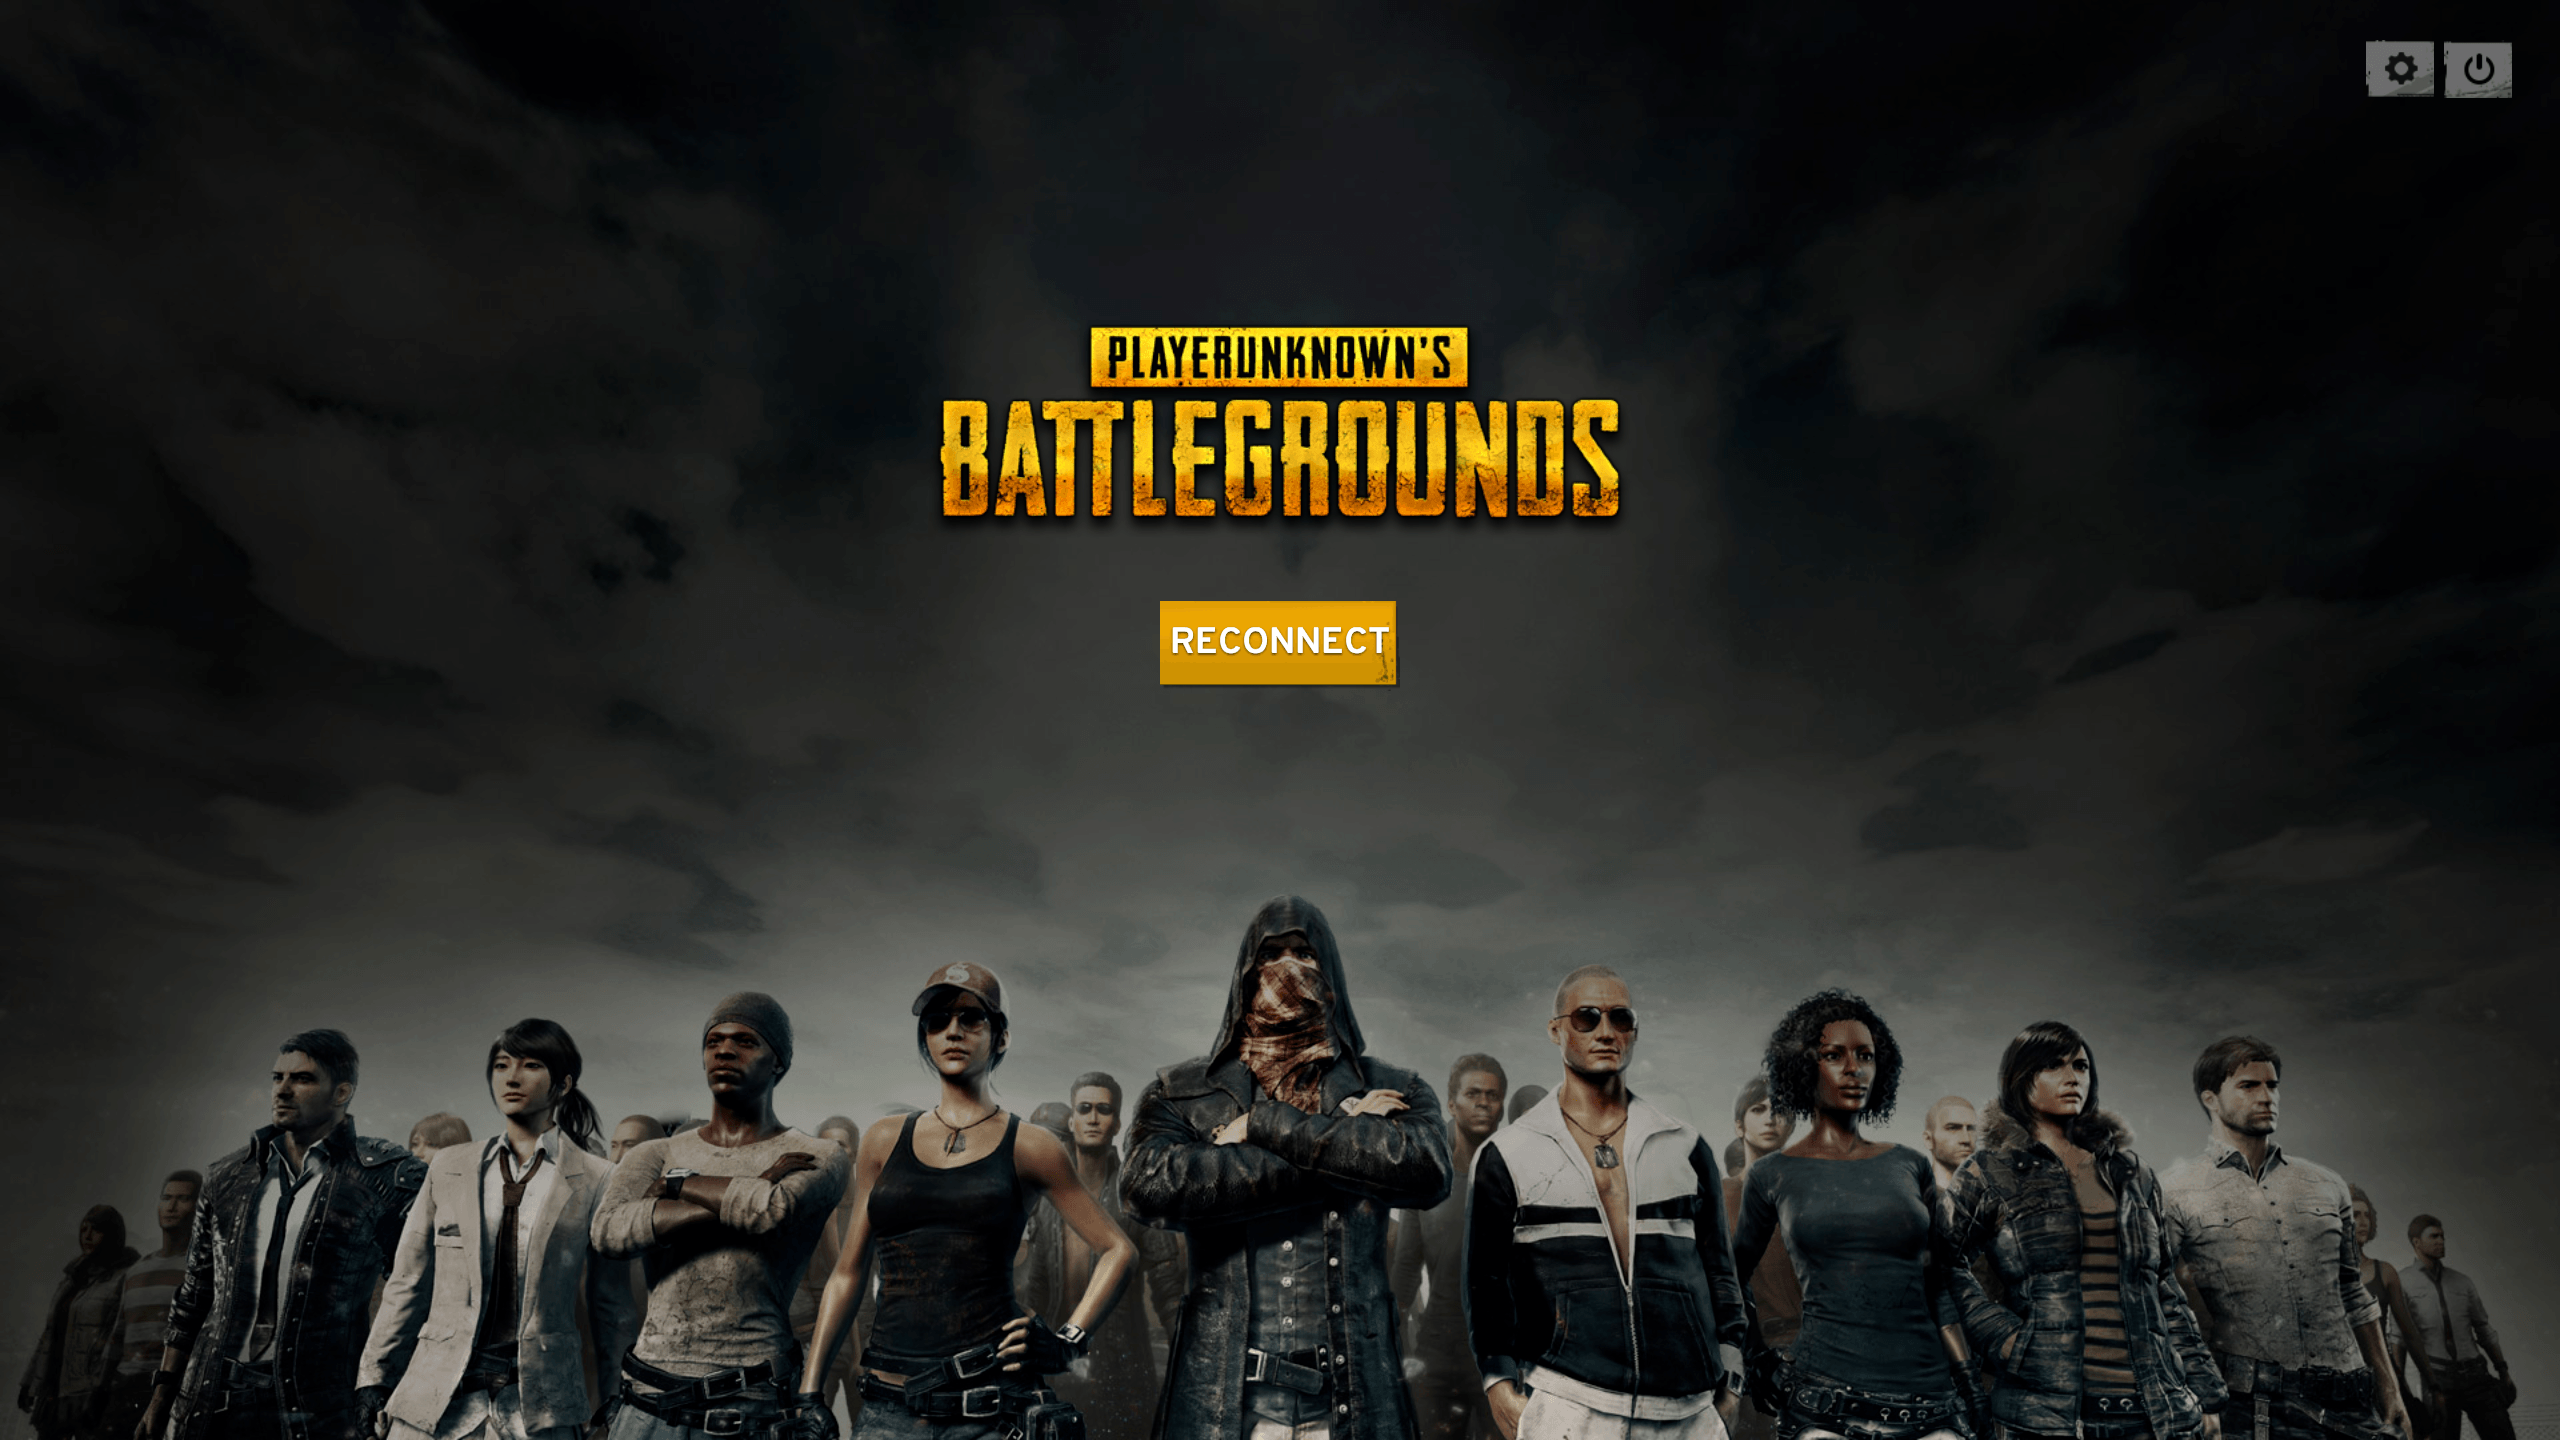 Pubg Mobile Wallpapers Wallpaper Cave - start screen game pubg wallpaper for phone and hd desktop backgrounds